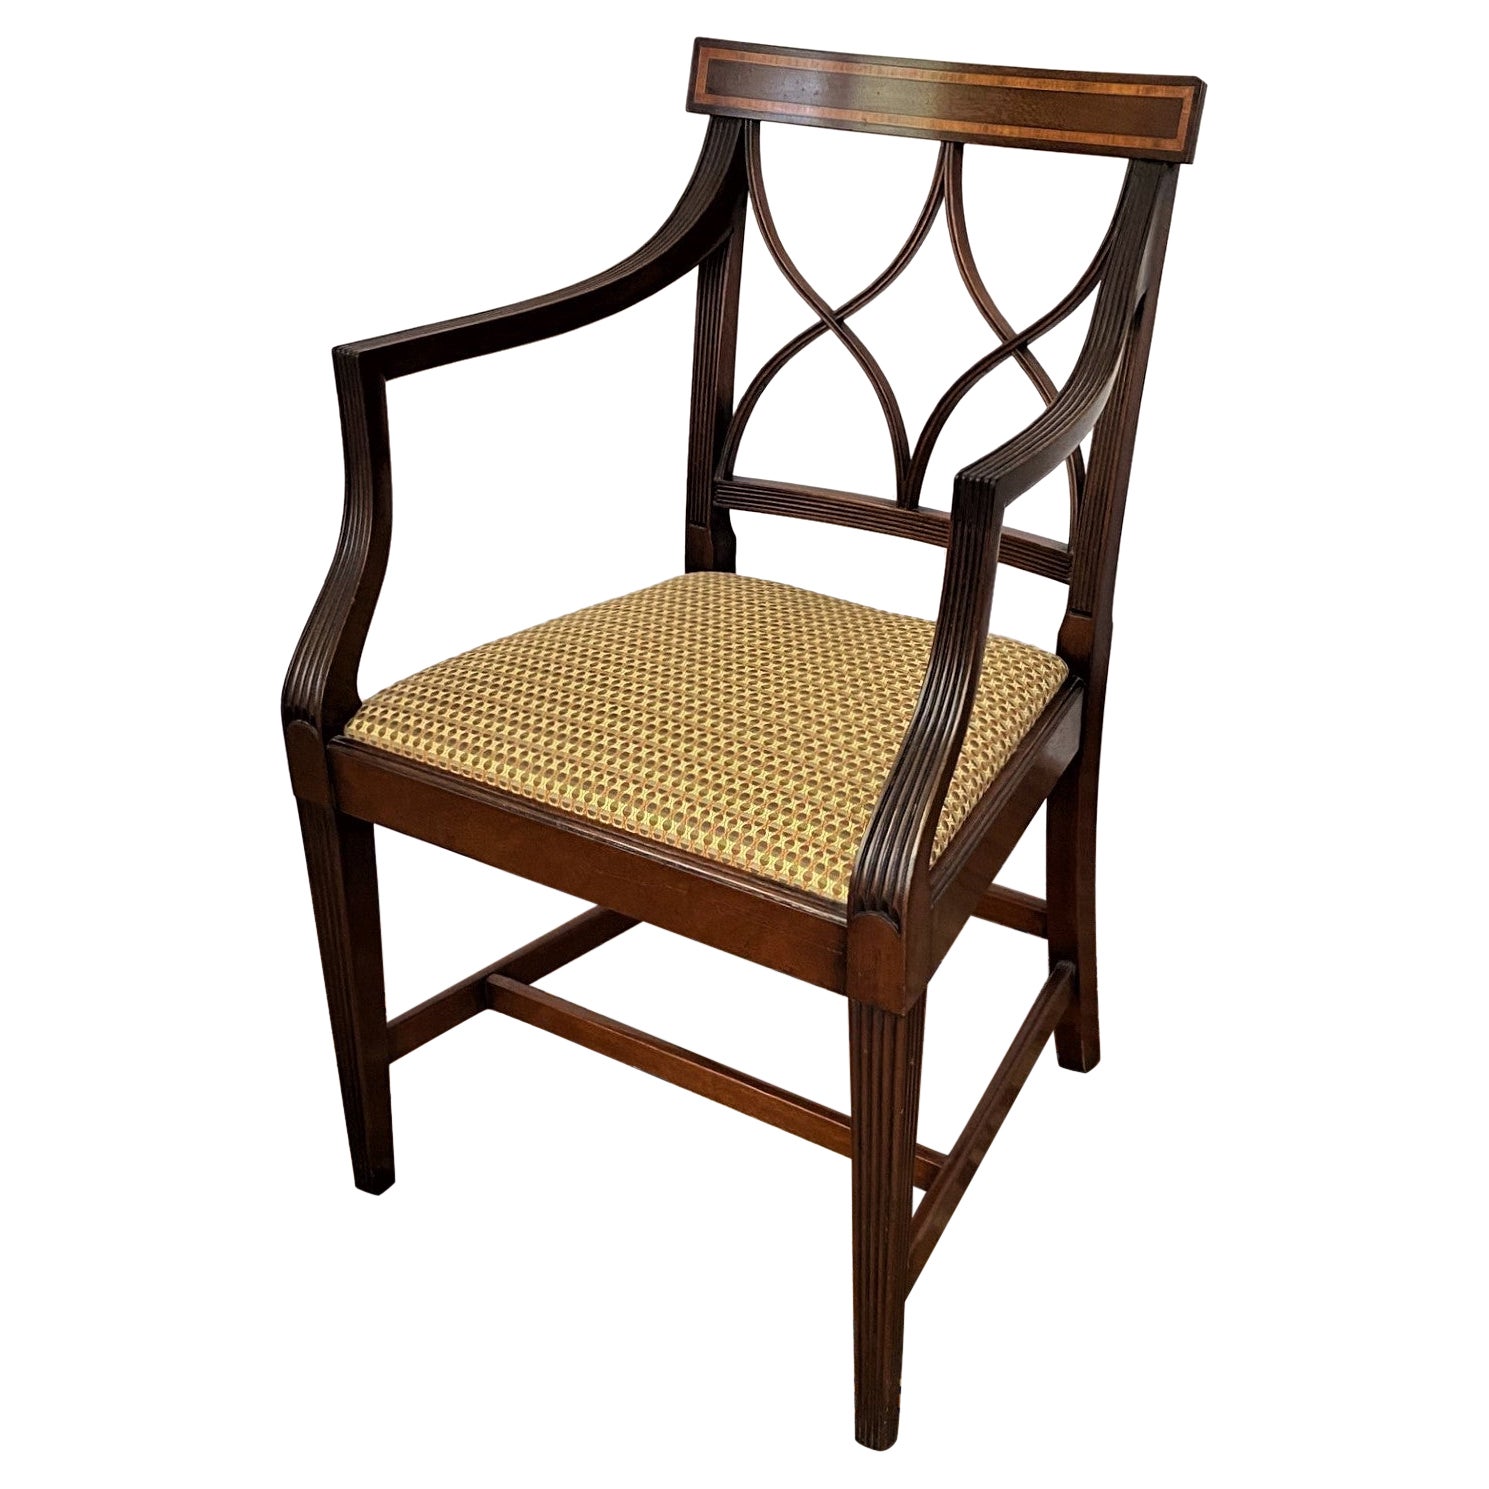 English-Made Sheraton Style Mahogany Armchair with Tulipwood Inaly. In Stock For Sale